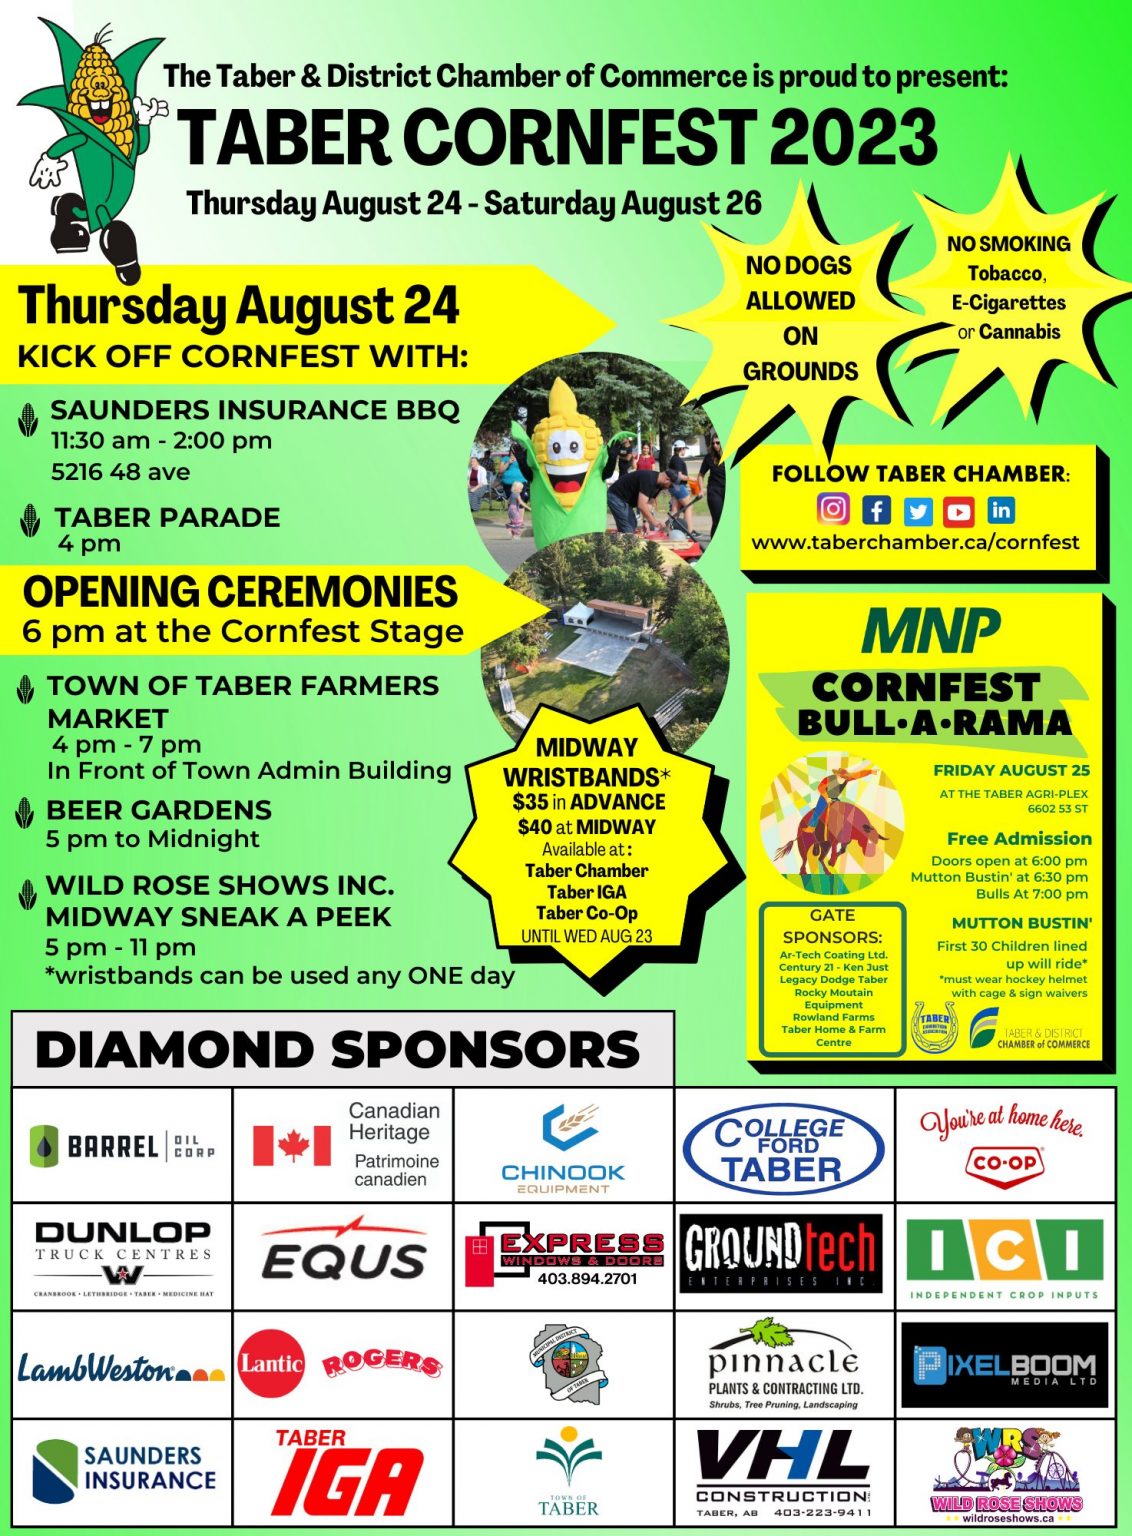 Cornfest Taber & District Chamber of Commerce